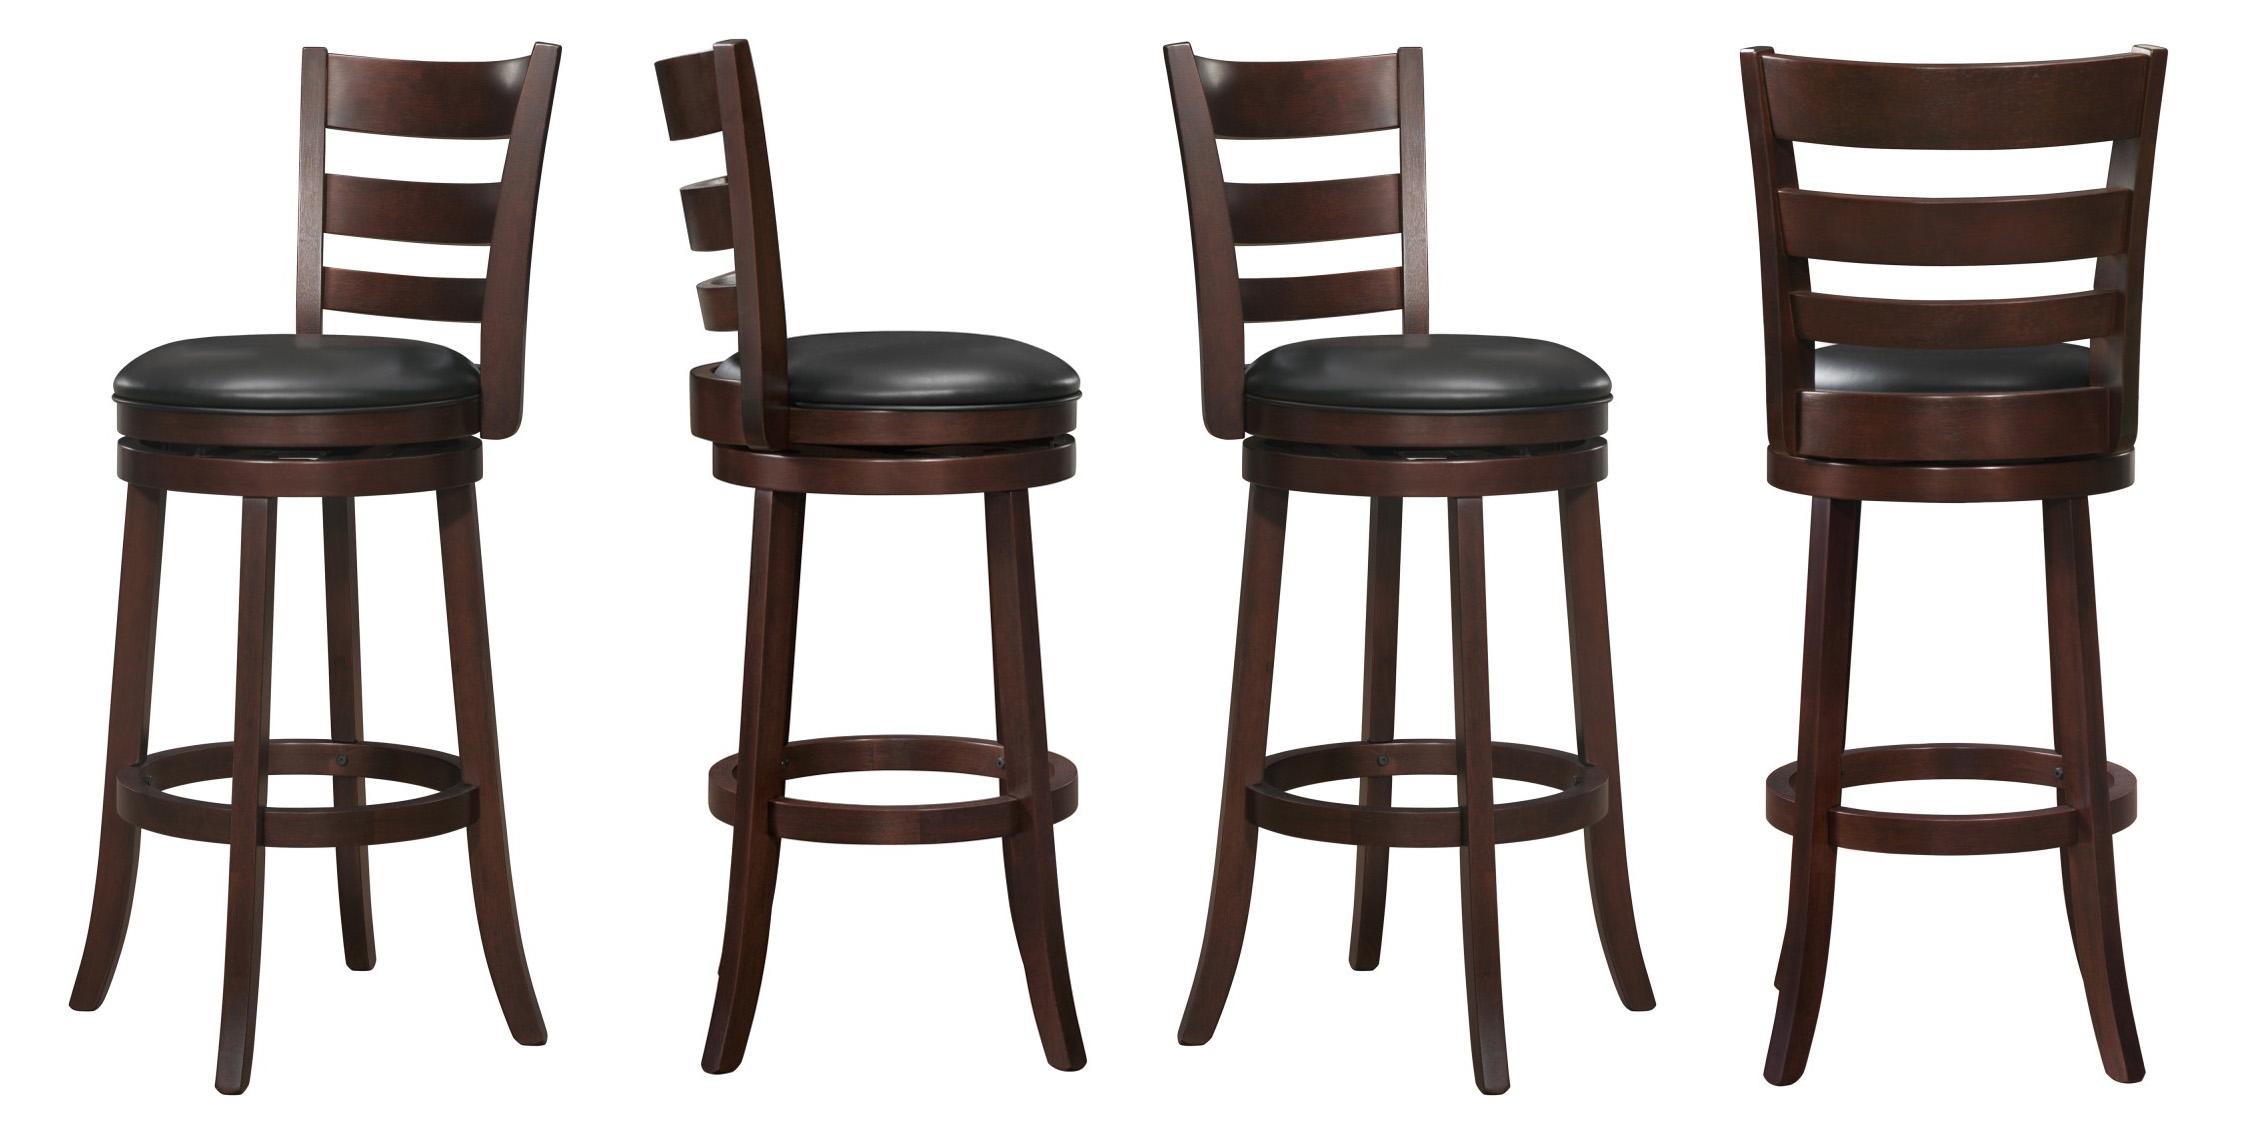 Traditional, Casual Dining Chair Set EDMOND 1144E-29S-Set-4 in Dark Cherry Faux Leather